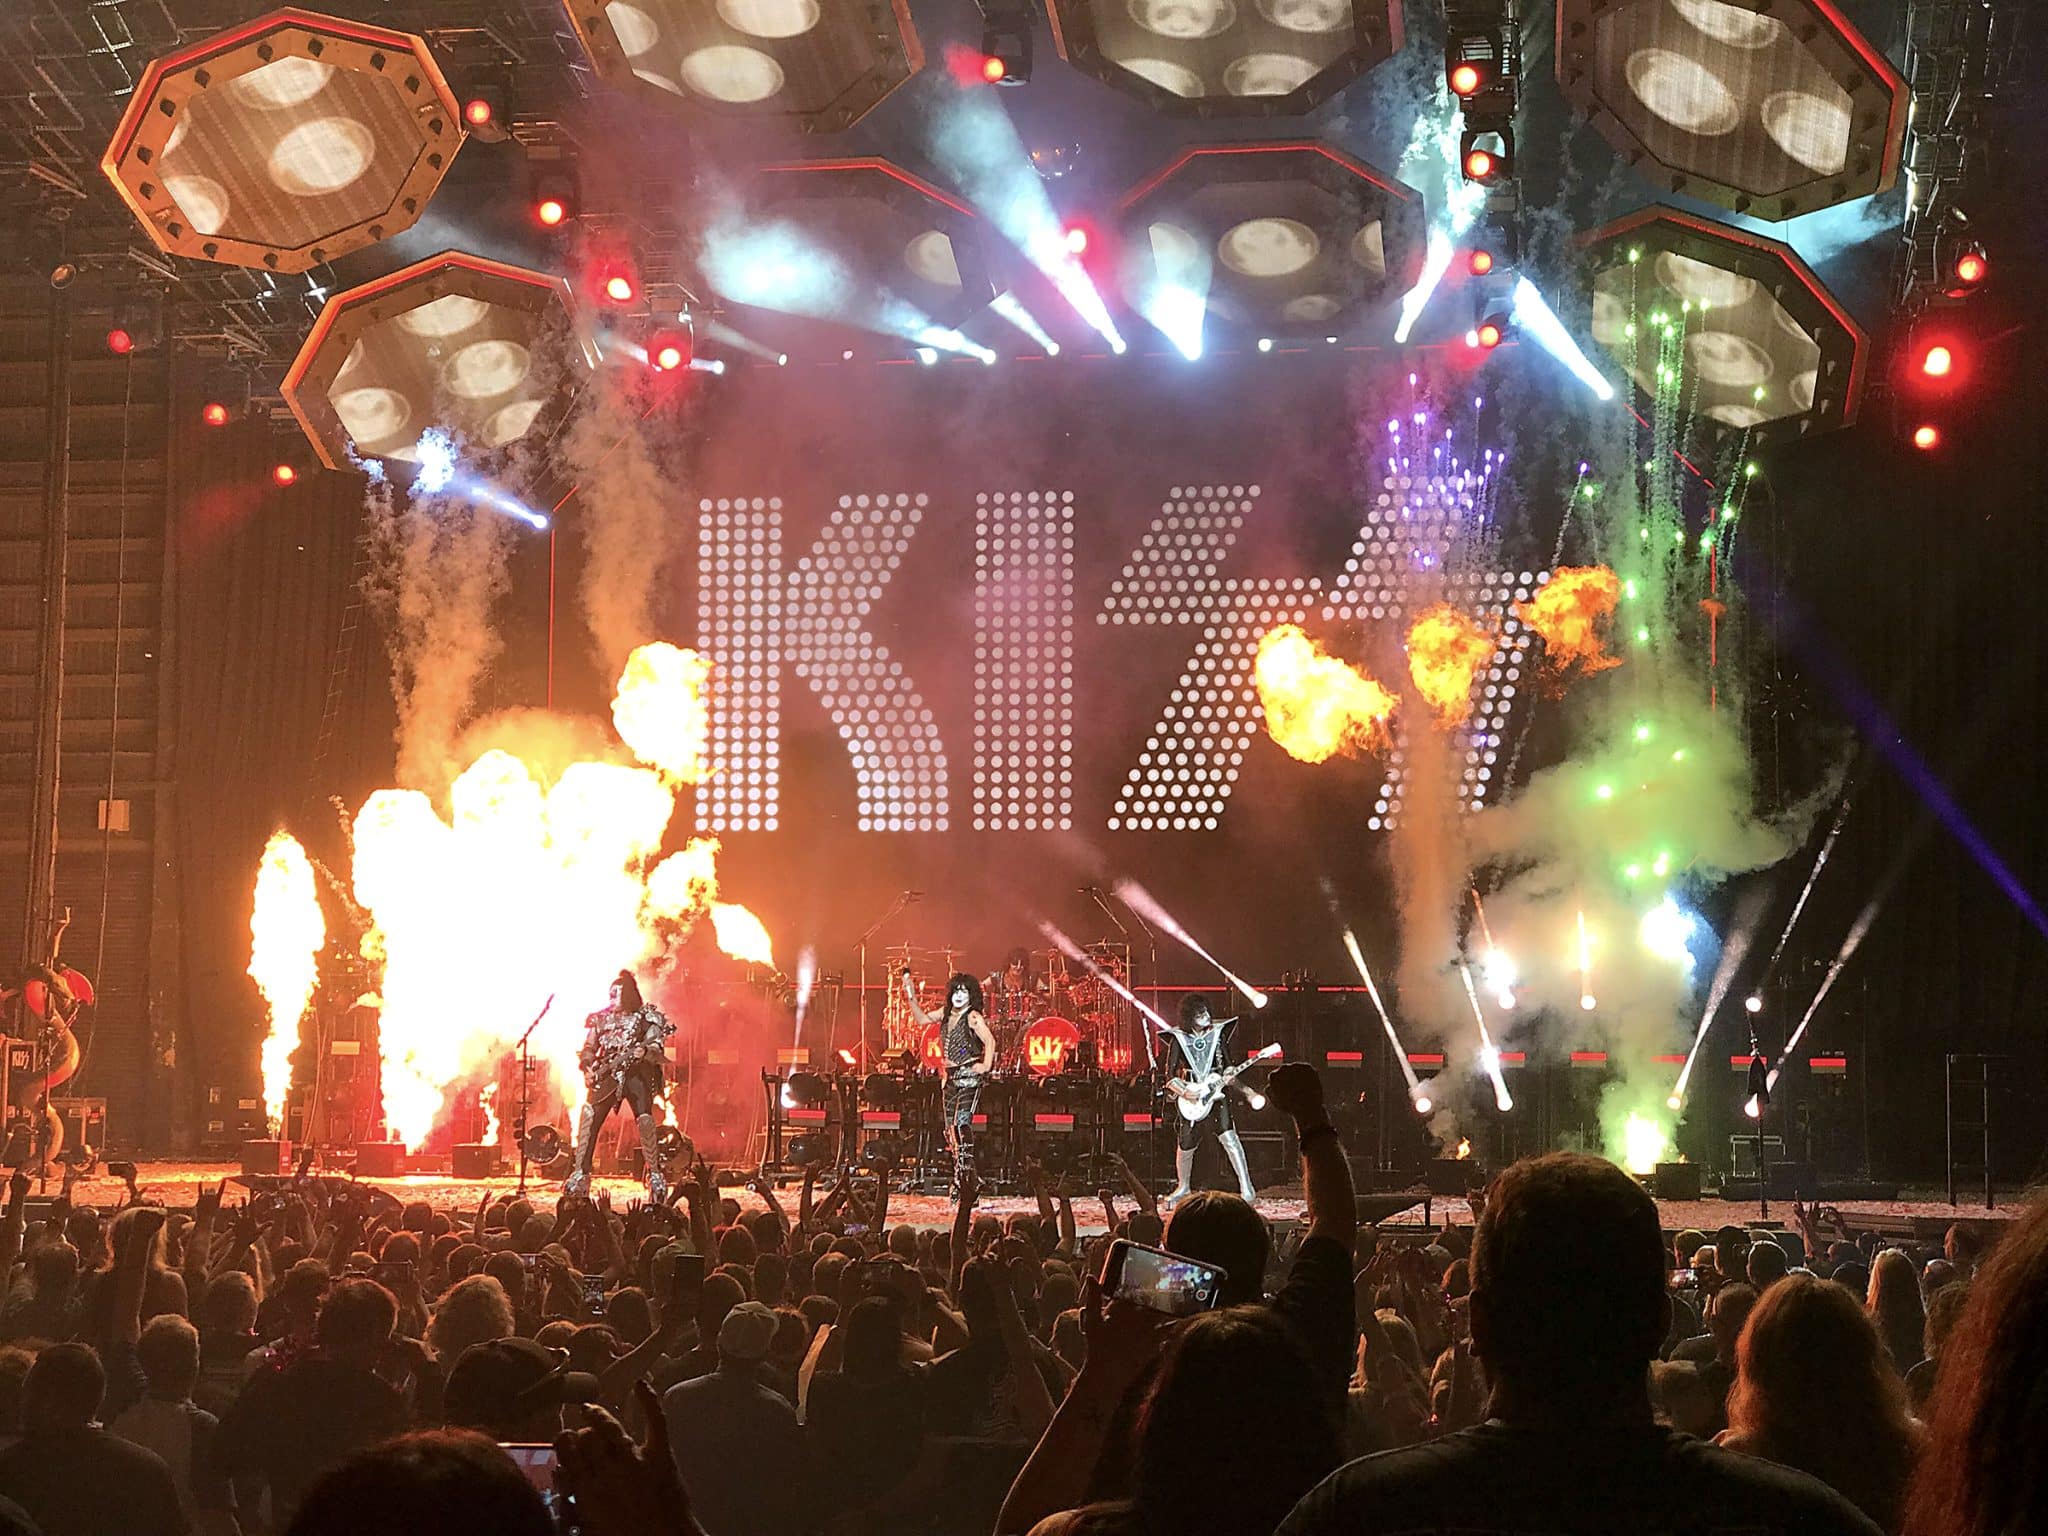 KISS sells off music catalog and iconic brand image for $300 million